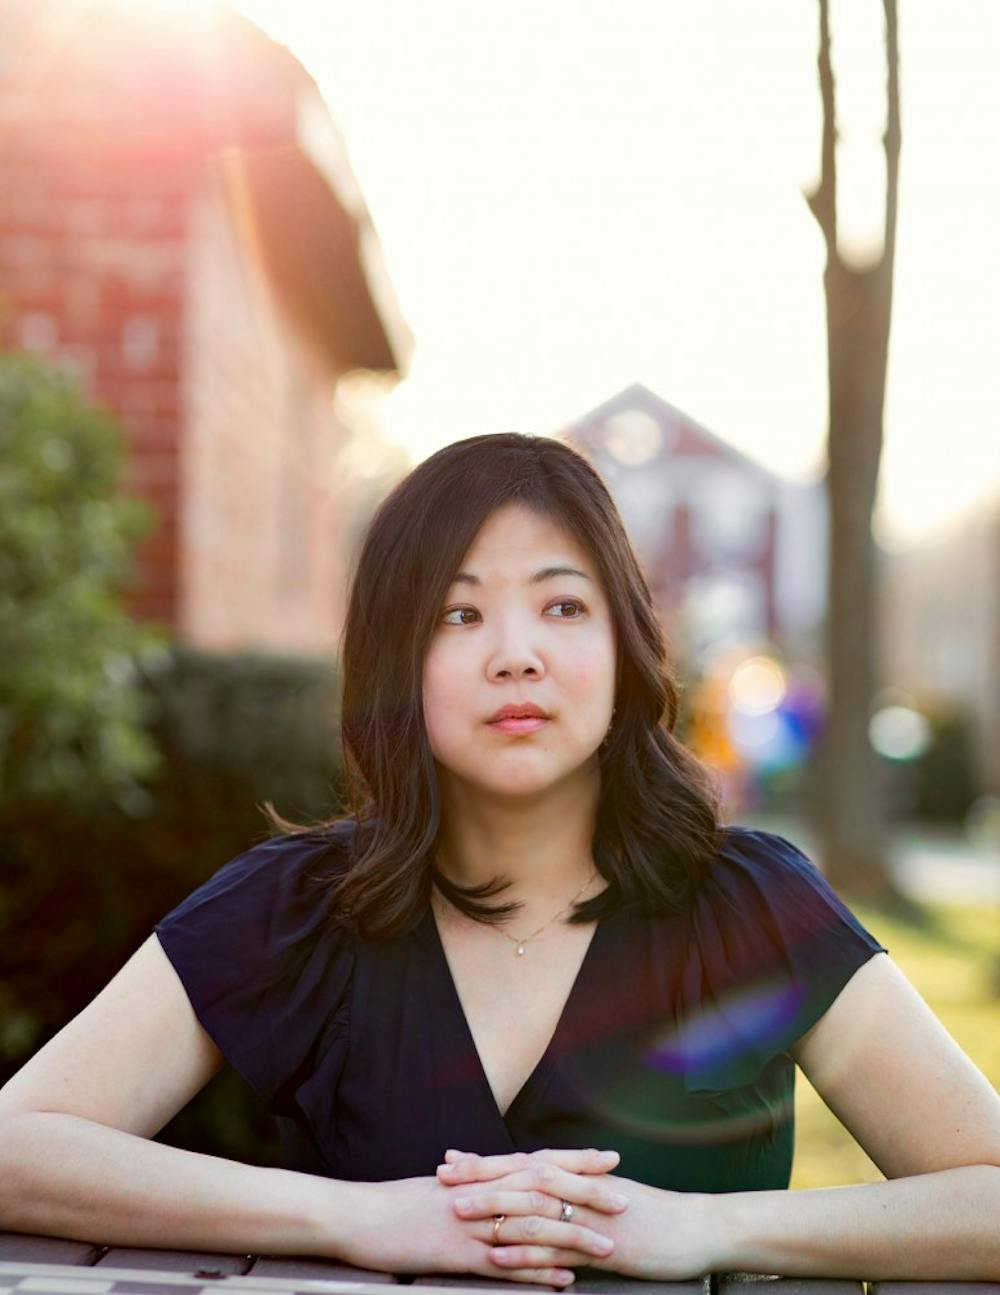 Nicole Chung, editor-in-chief of Catapult magazine and the former managing editor of The Toast, makes her debut with the memoir "All You Can Ever Know."